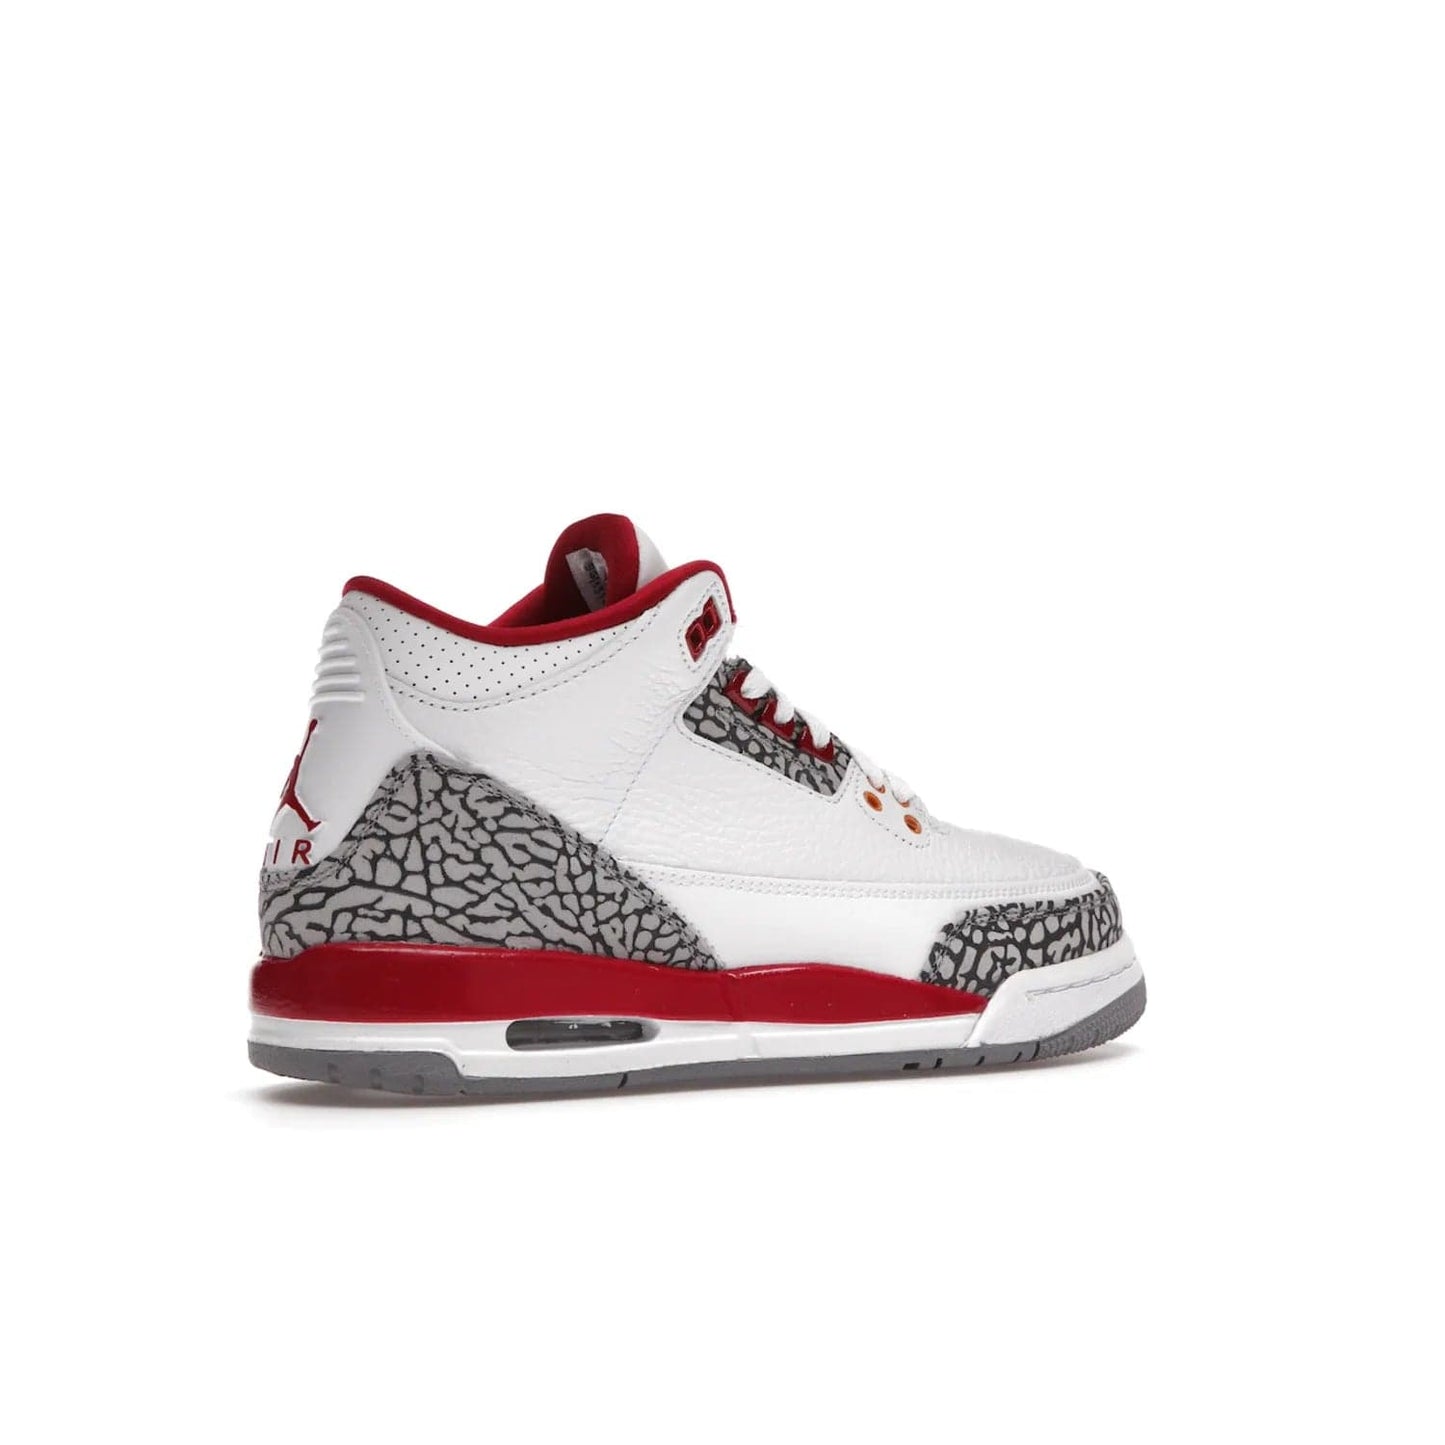 Jordan 3 Retro Cardinal (GS) - Image 34 - Only at www.BallersClubKickz.com - Shop the kid-sized Air Jordan 3 Retro Cardinal GS, released Feb 2022. White tumbled leather upper, light curry accenting, cement grey and classic red details throughout. Visible Air cushioning, midsole, and an eye-catching outsole. Show off your style with this fashionable streetwear silhouette.